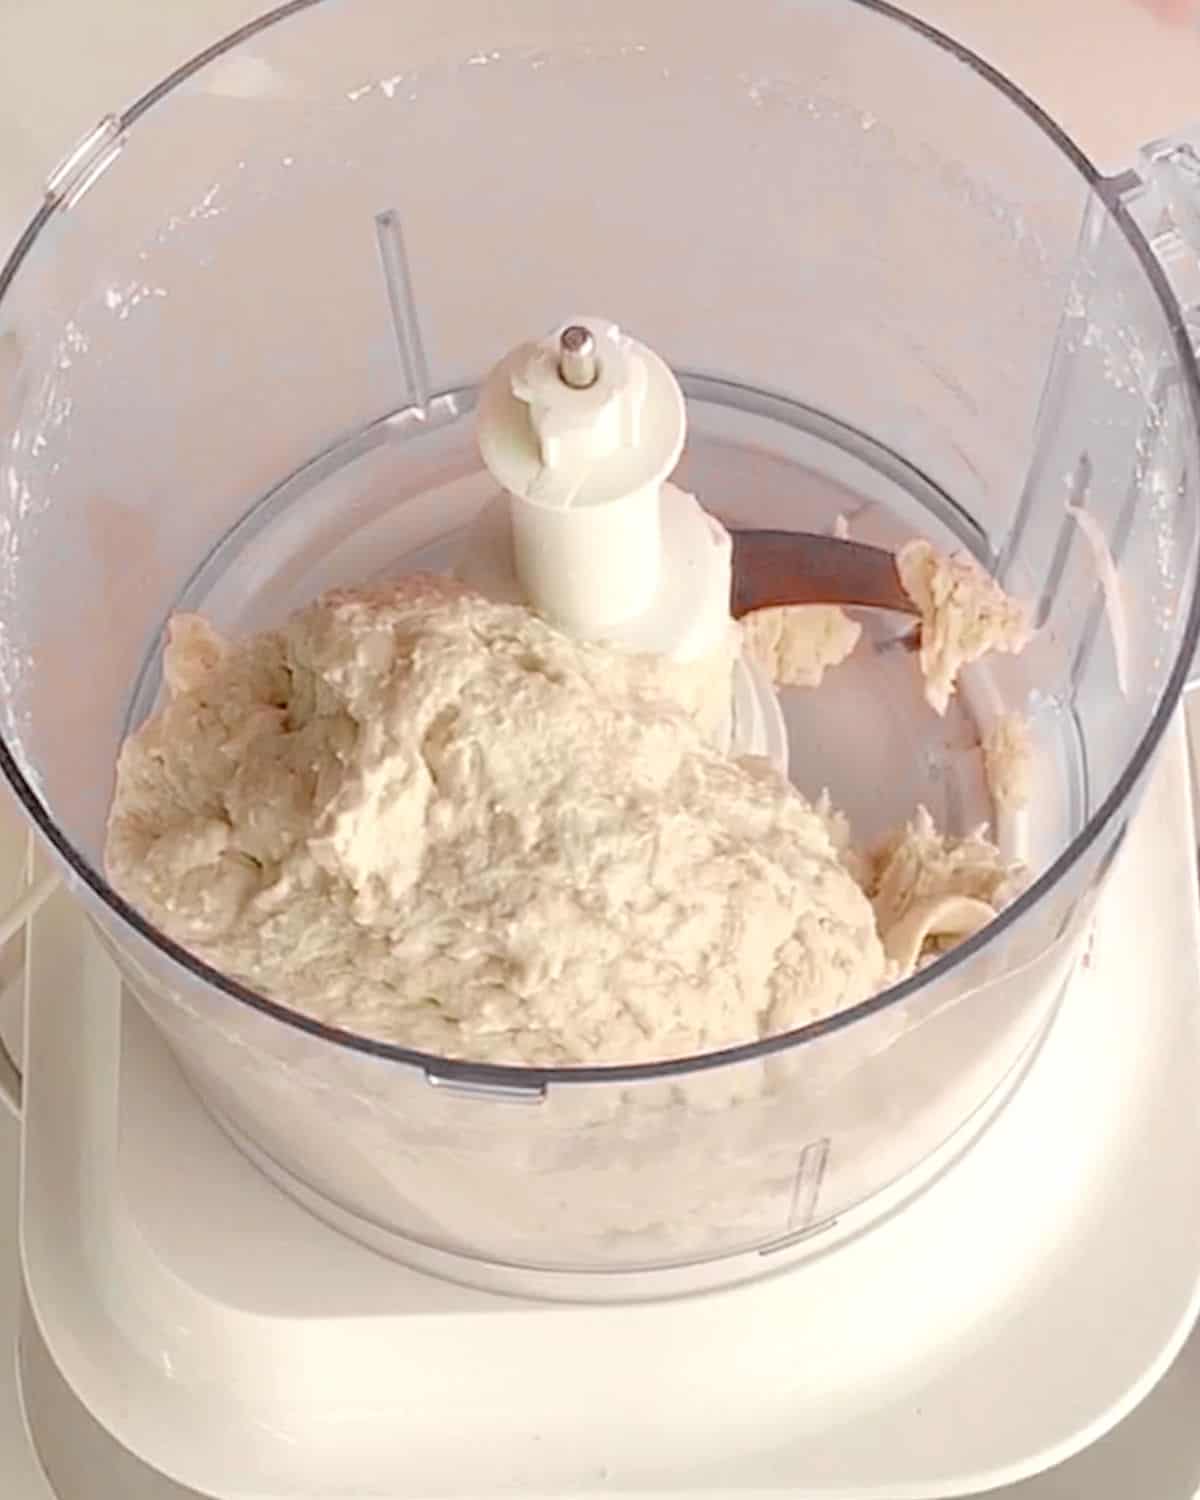 Bread dough in the bowl of a food processor. View from above.